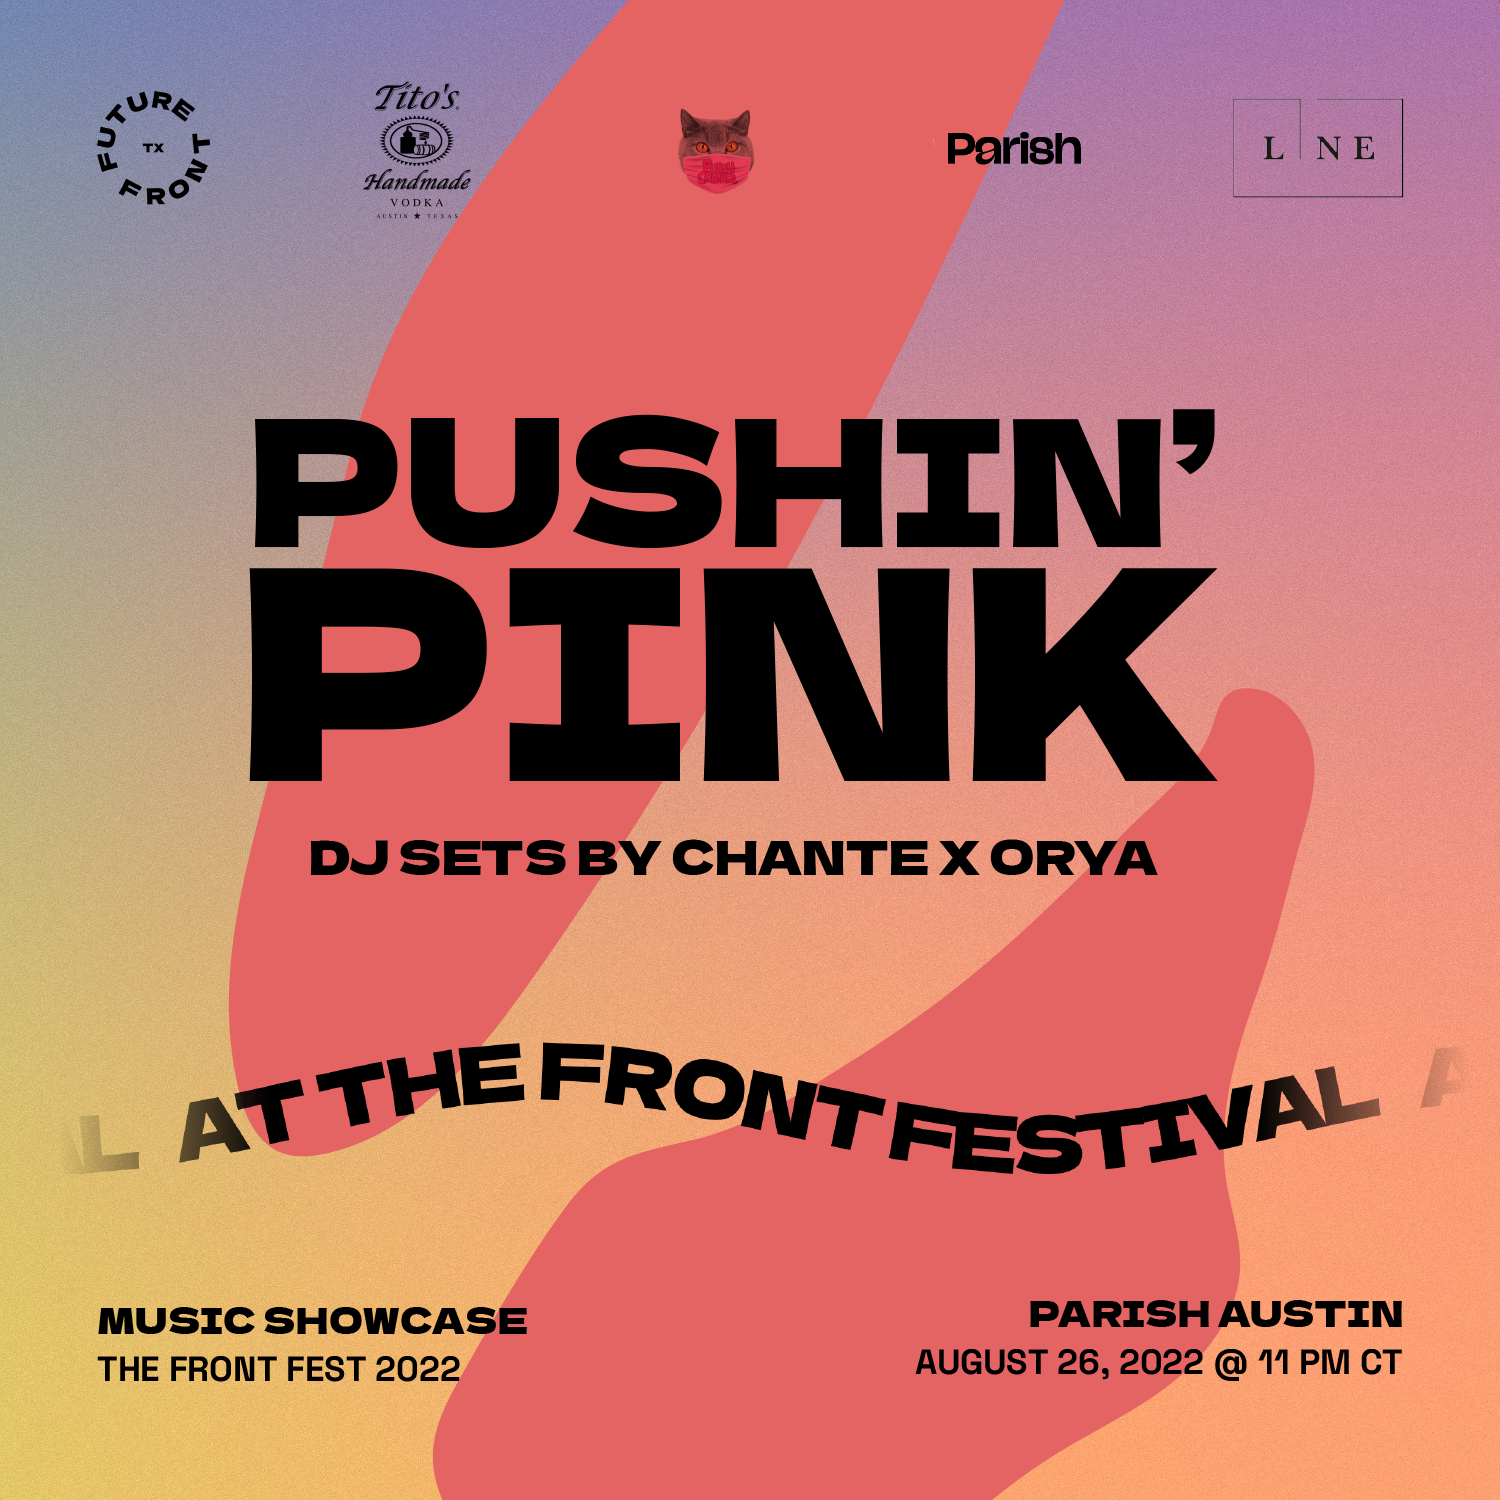 thefrontfest2022flyers-pushinpink5.png